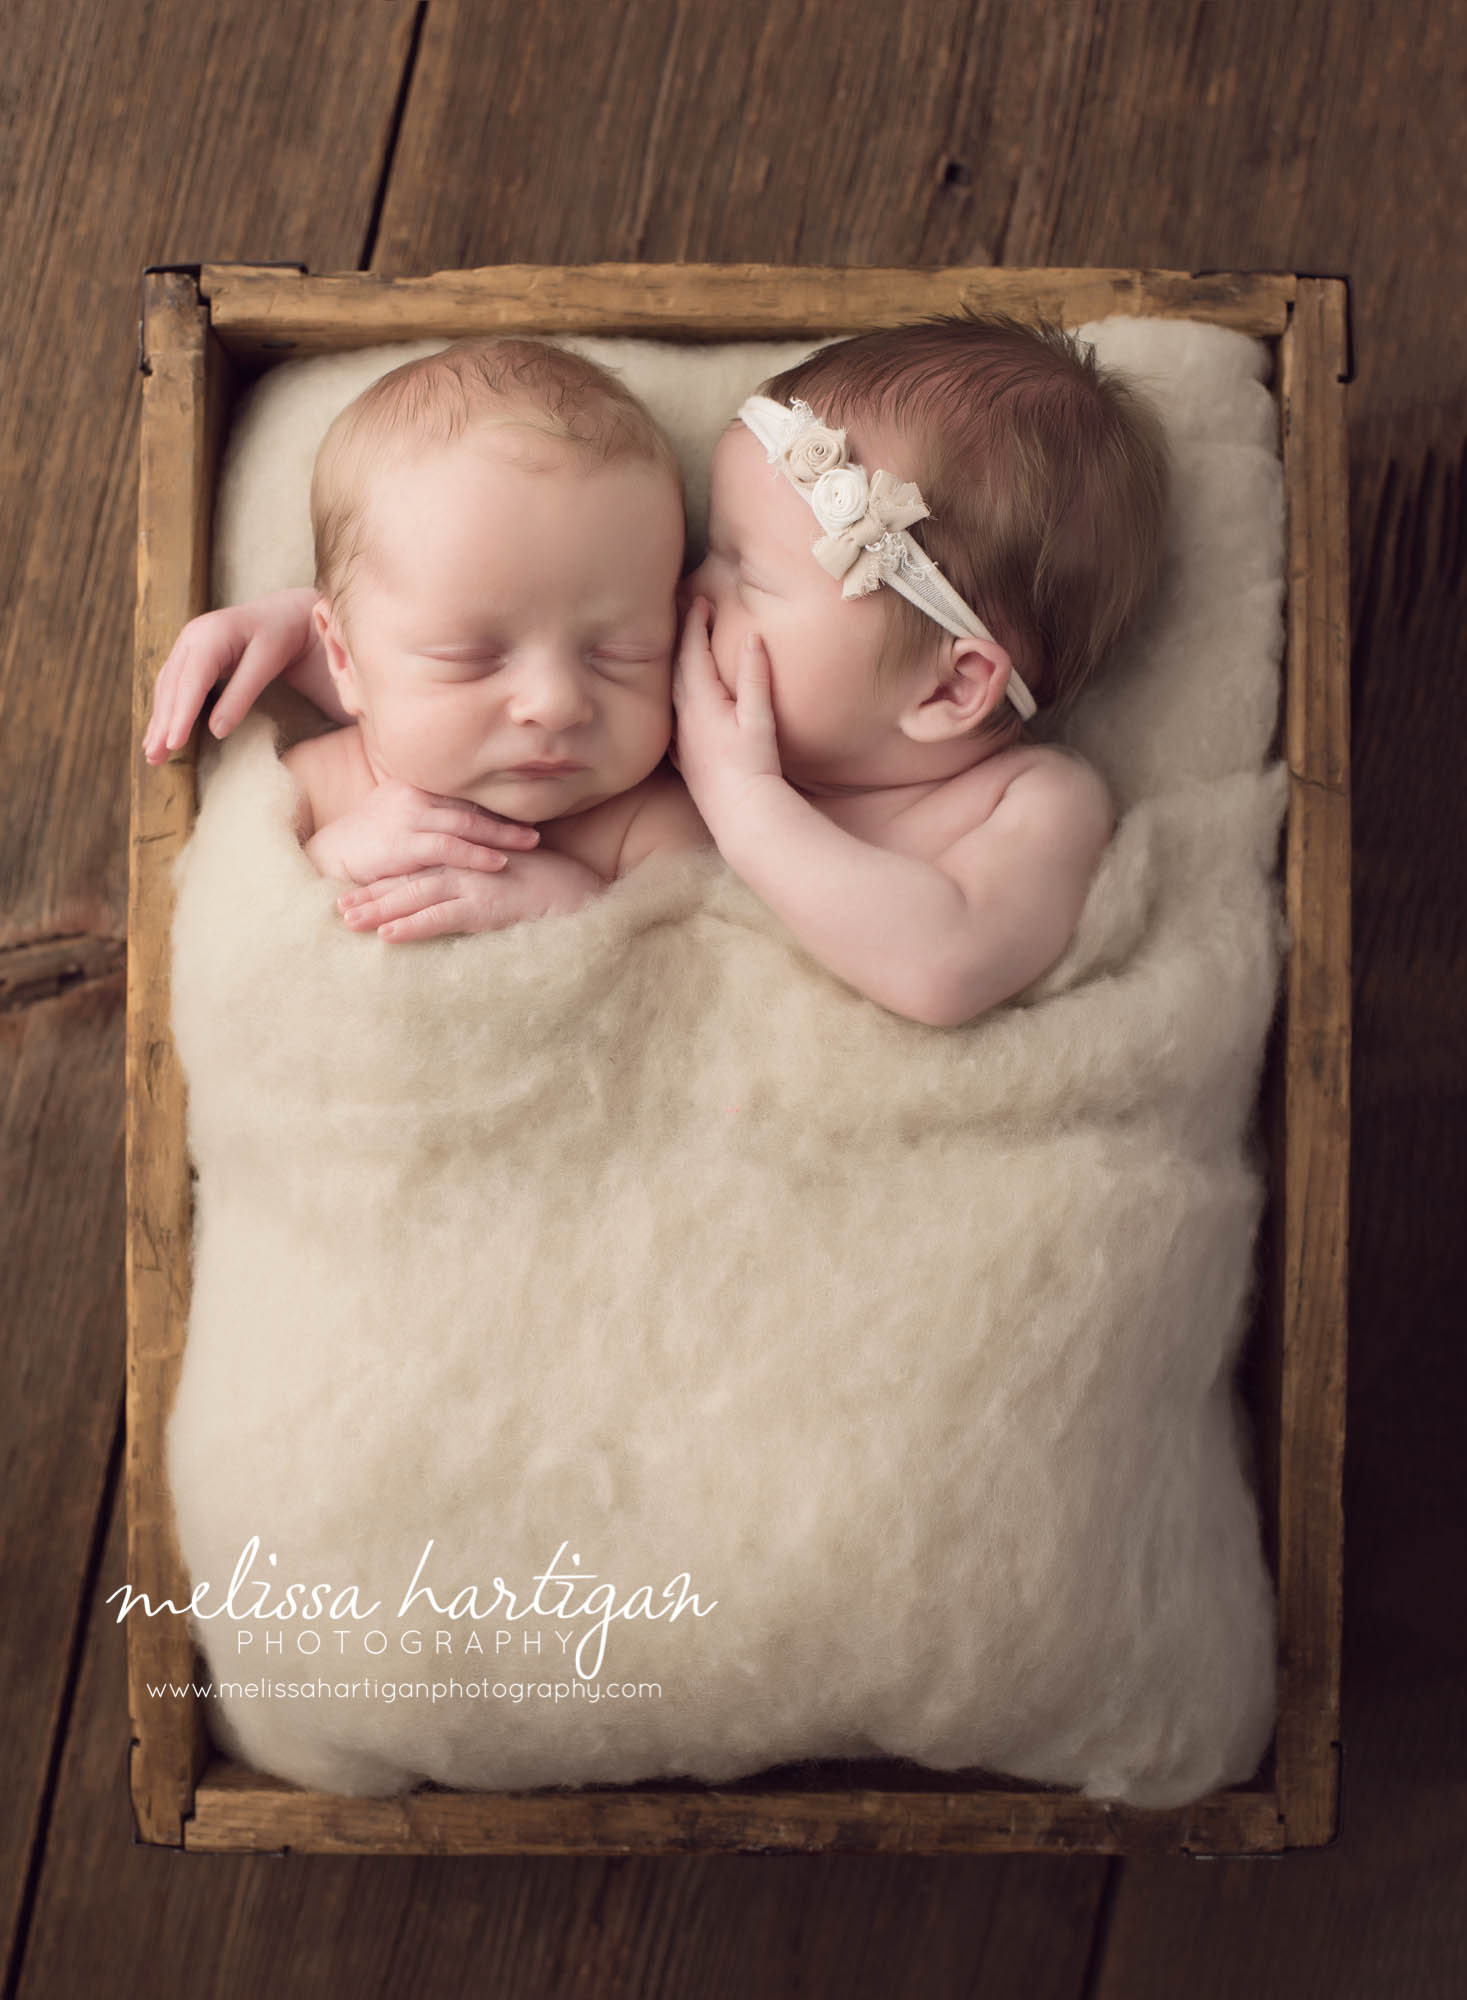 Melissa Hartigan Photography Connecticut Newborn twin Photographer Coventry Ct Middlefield CT baby Fairfield county Newborn and maternity CT photographer Newborn twin photographer baby twins sleeping in wooden box baby sister whispering to brother